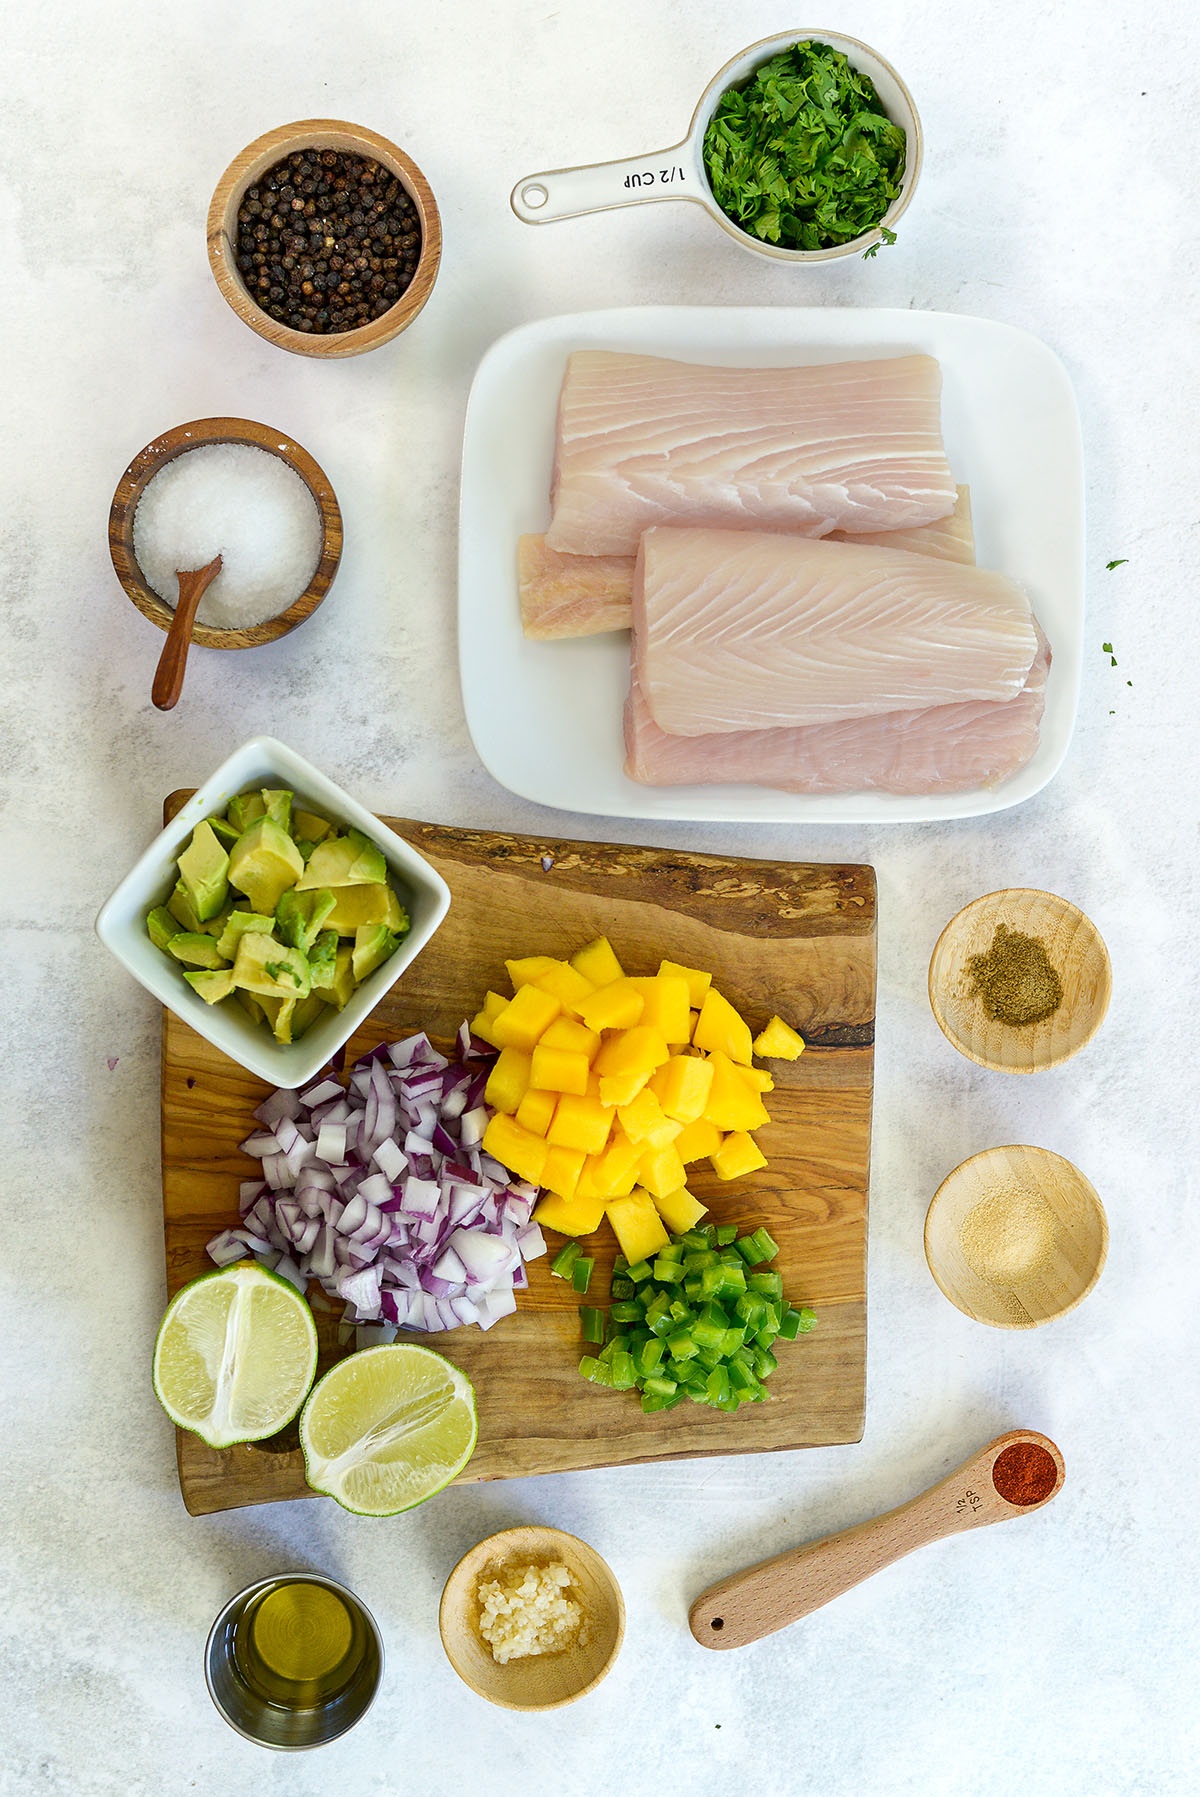 Mahi mahi and mango salsa ingredients spread out on a countertop.